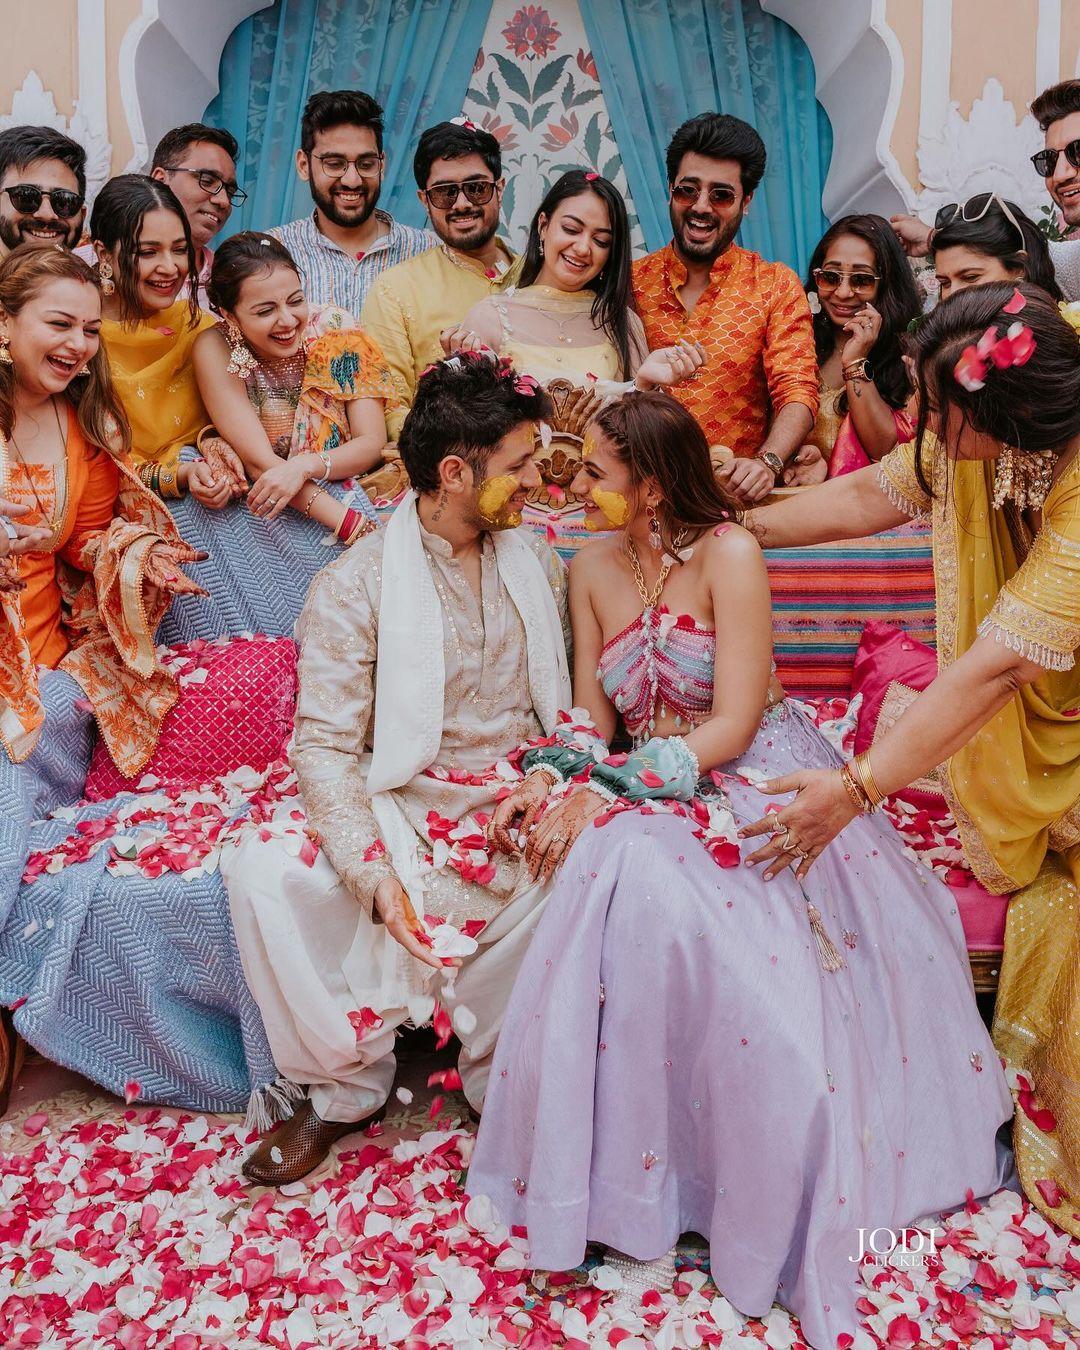 Surbhi Chandna, the actress famous for her role in the TV show Ishqbaaaz, tied the knot with her longtime partner Karan Sharma in Jaipur, Rajasthan on Saturday, March 2nd